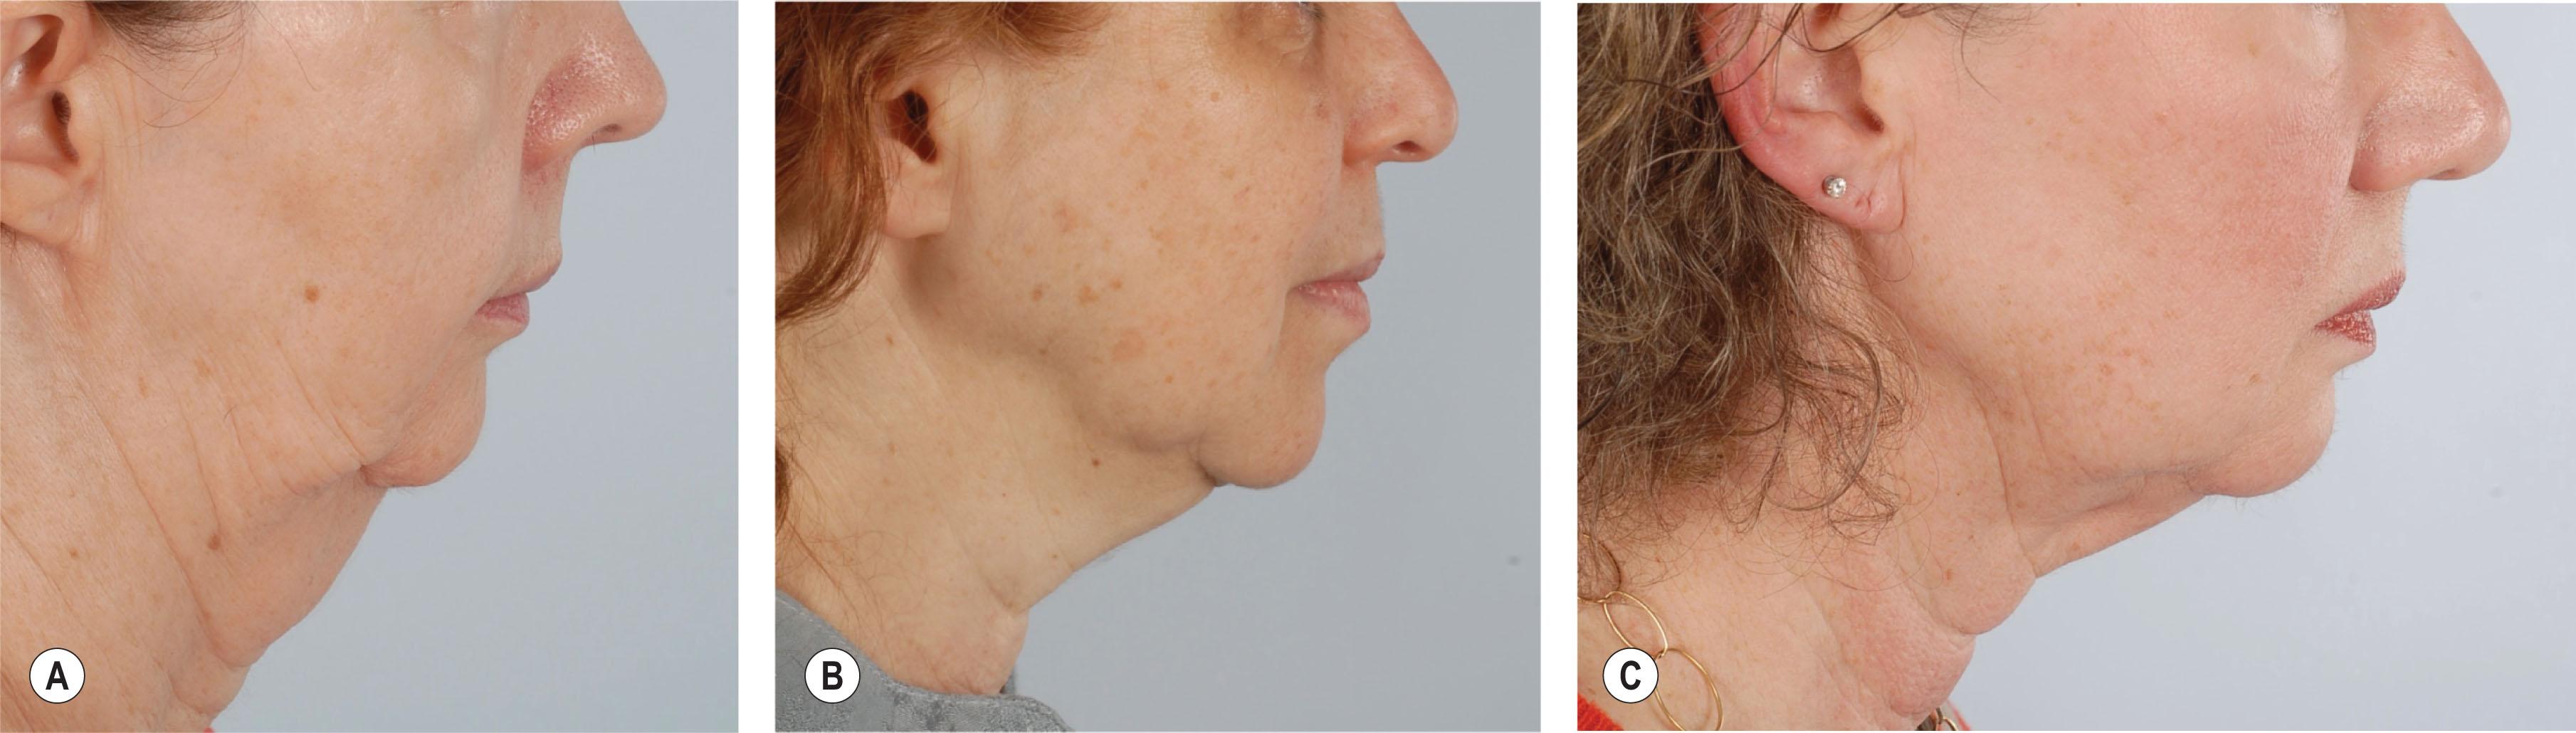 Figure 21.11.4, (A–C) In the mature patient, insufficient skeletal support from uncorrected skeletal dysplasia leads to a prematurely aged facial appearance leading many patients to pursue facial rejuvenation procedures to improve soft-tissue laxity.